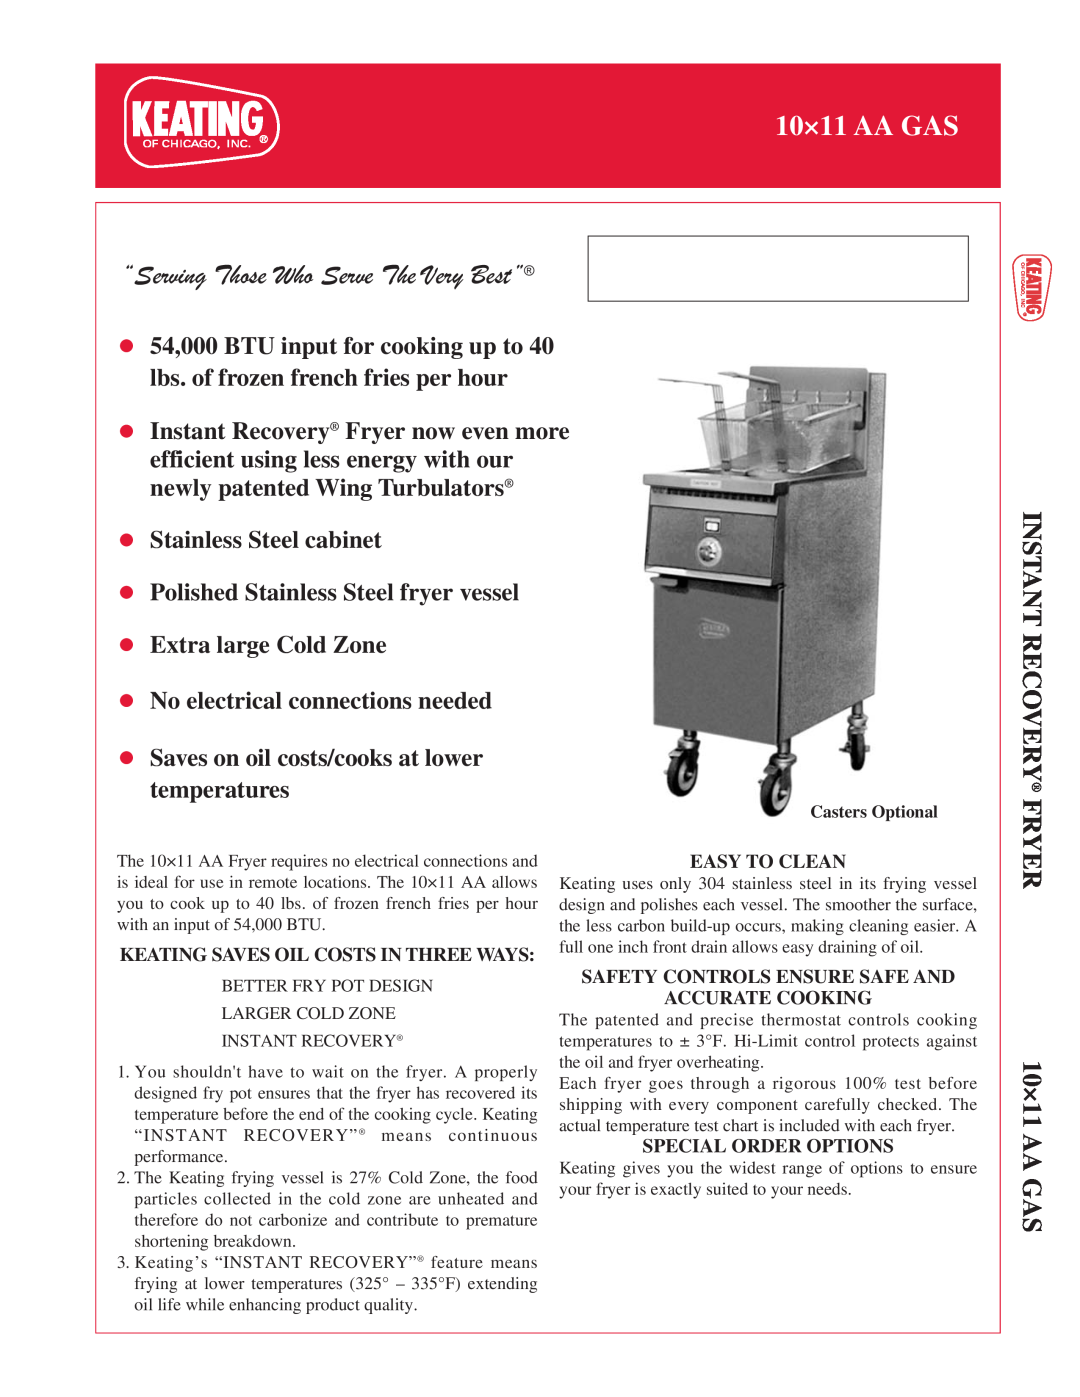 Keating Of Chicago 10x11AA Gas manual INSTANT RECOVERY FRYER 10×11 AA GAS, Casters Optional, Stainless Steel cabinet 